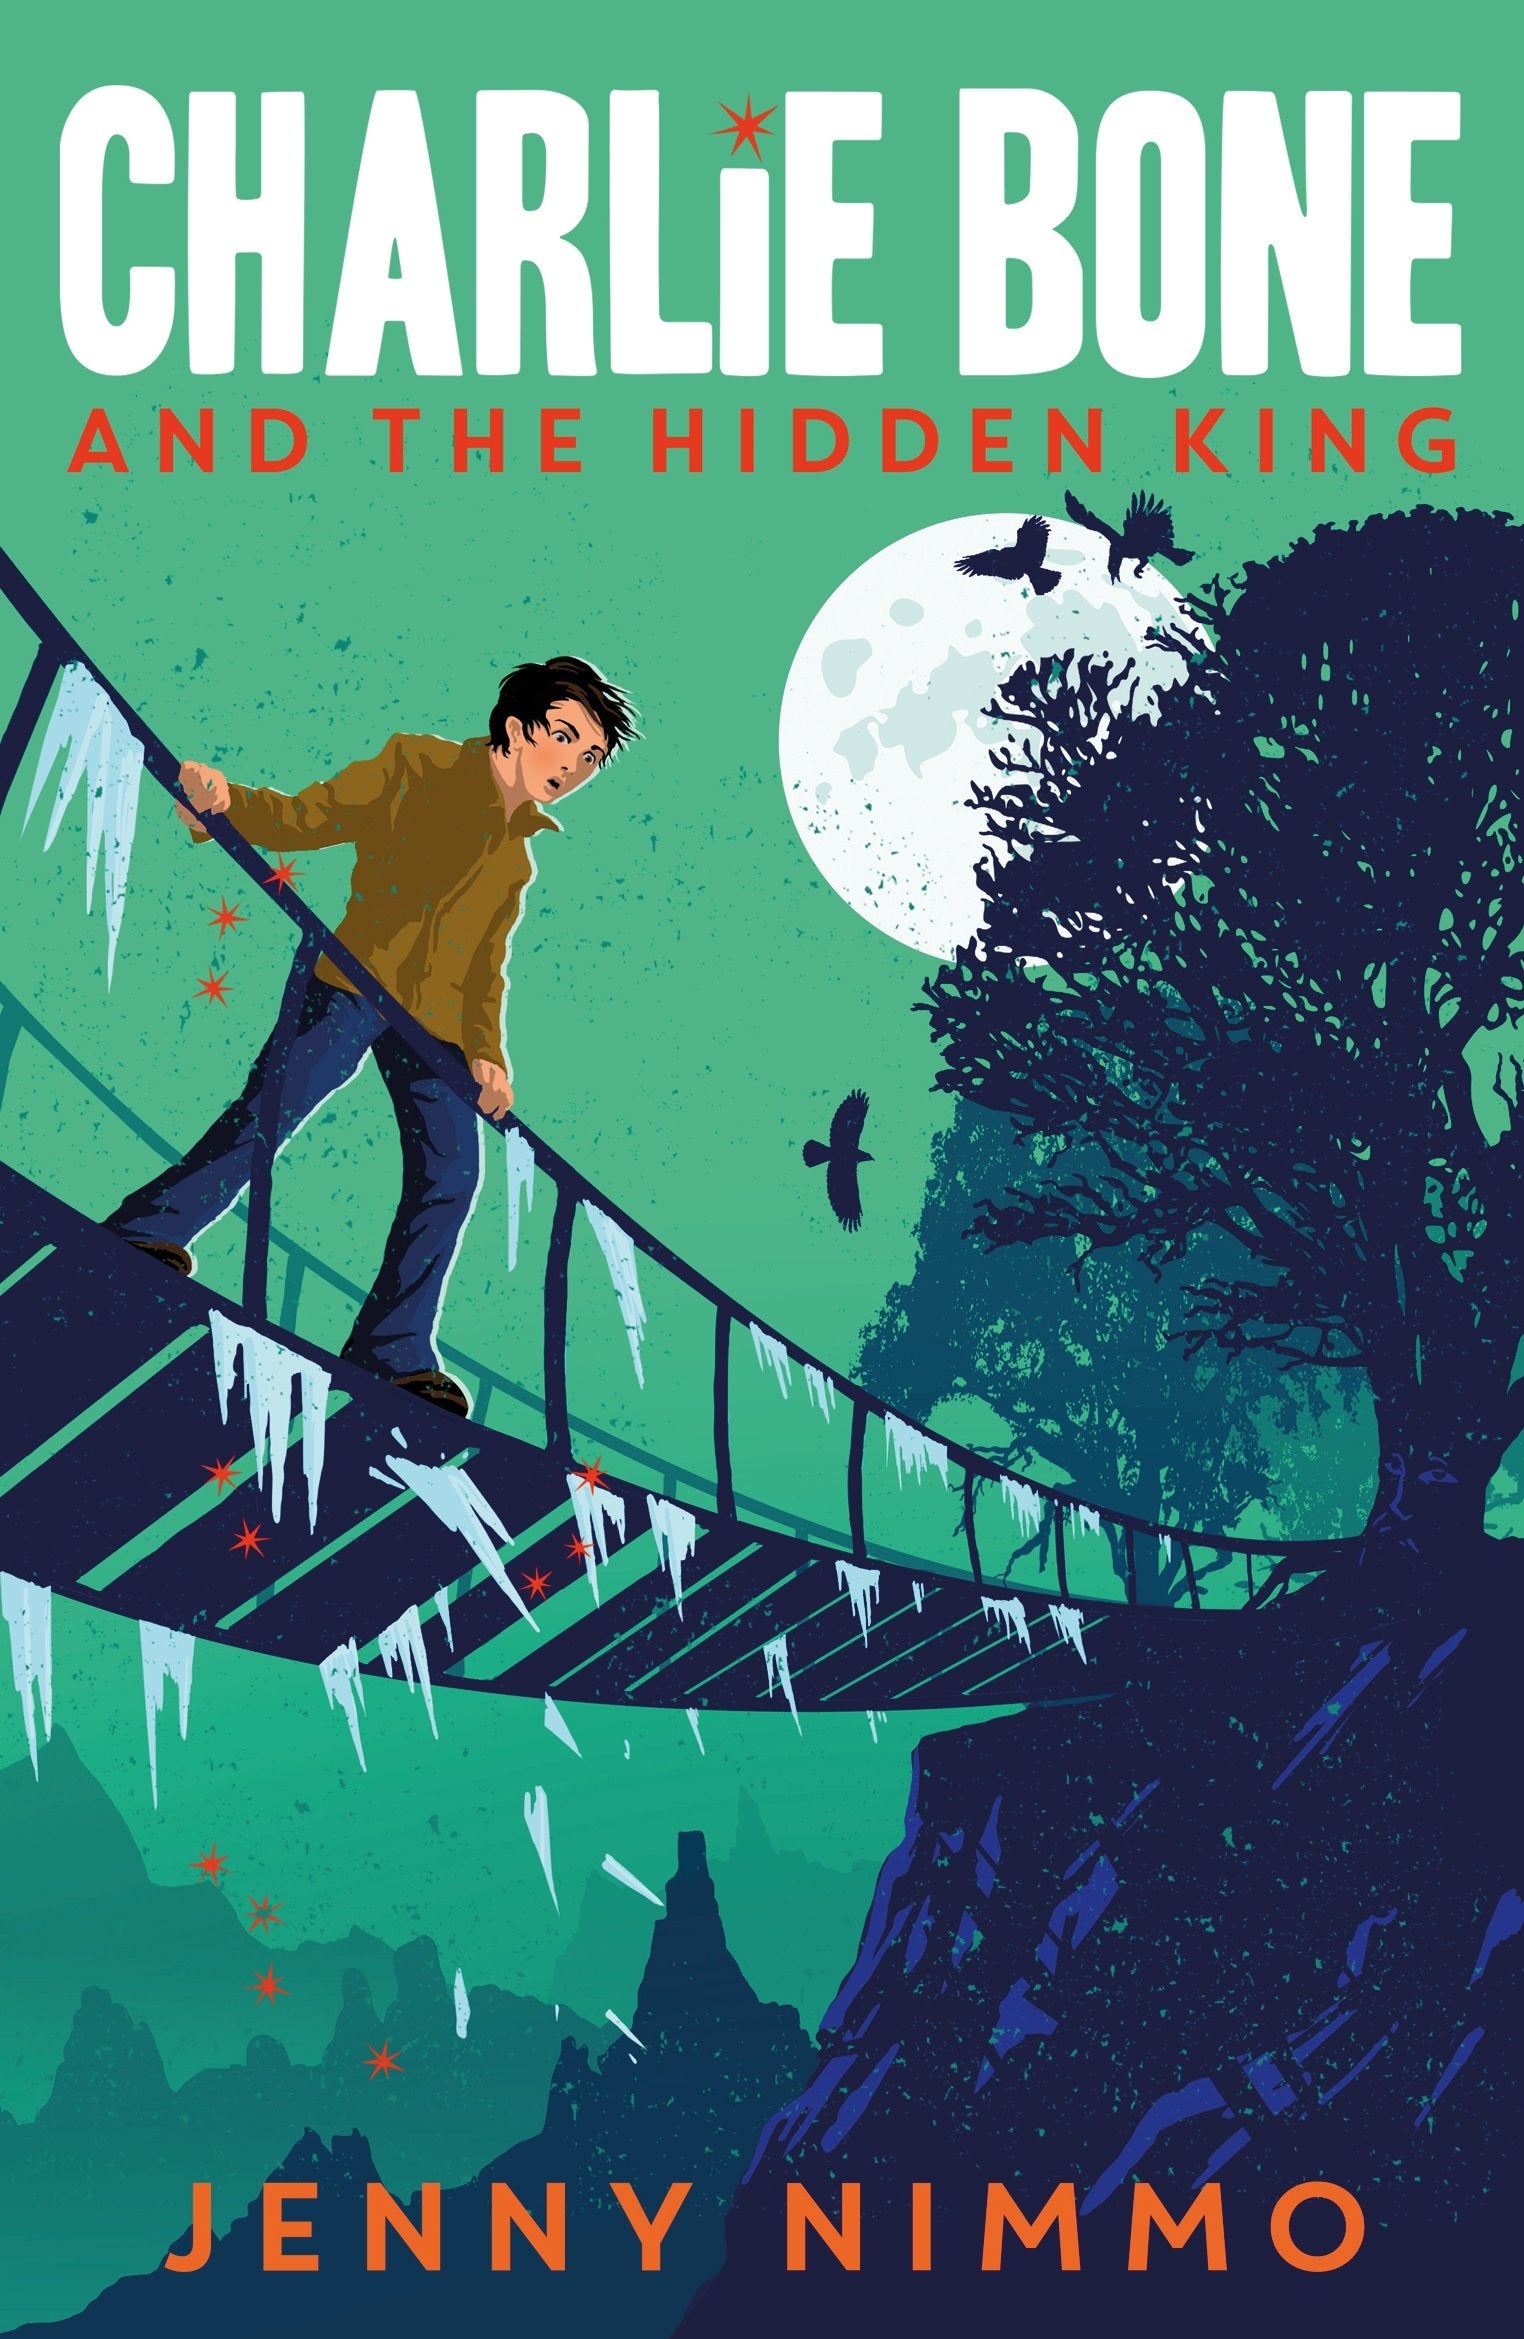 Children of the Red King #5: Charlie Bone and the Hidden King